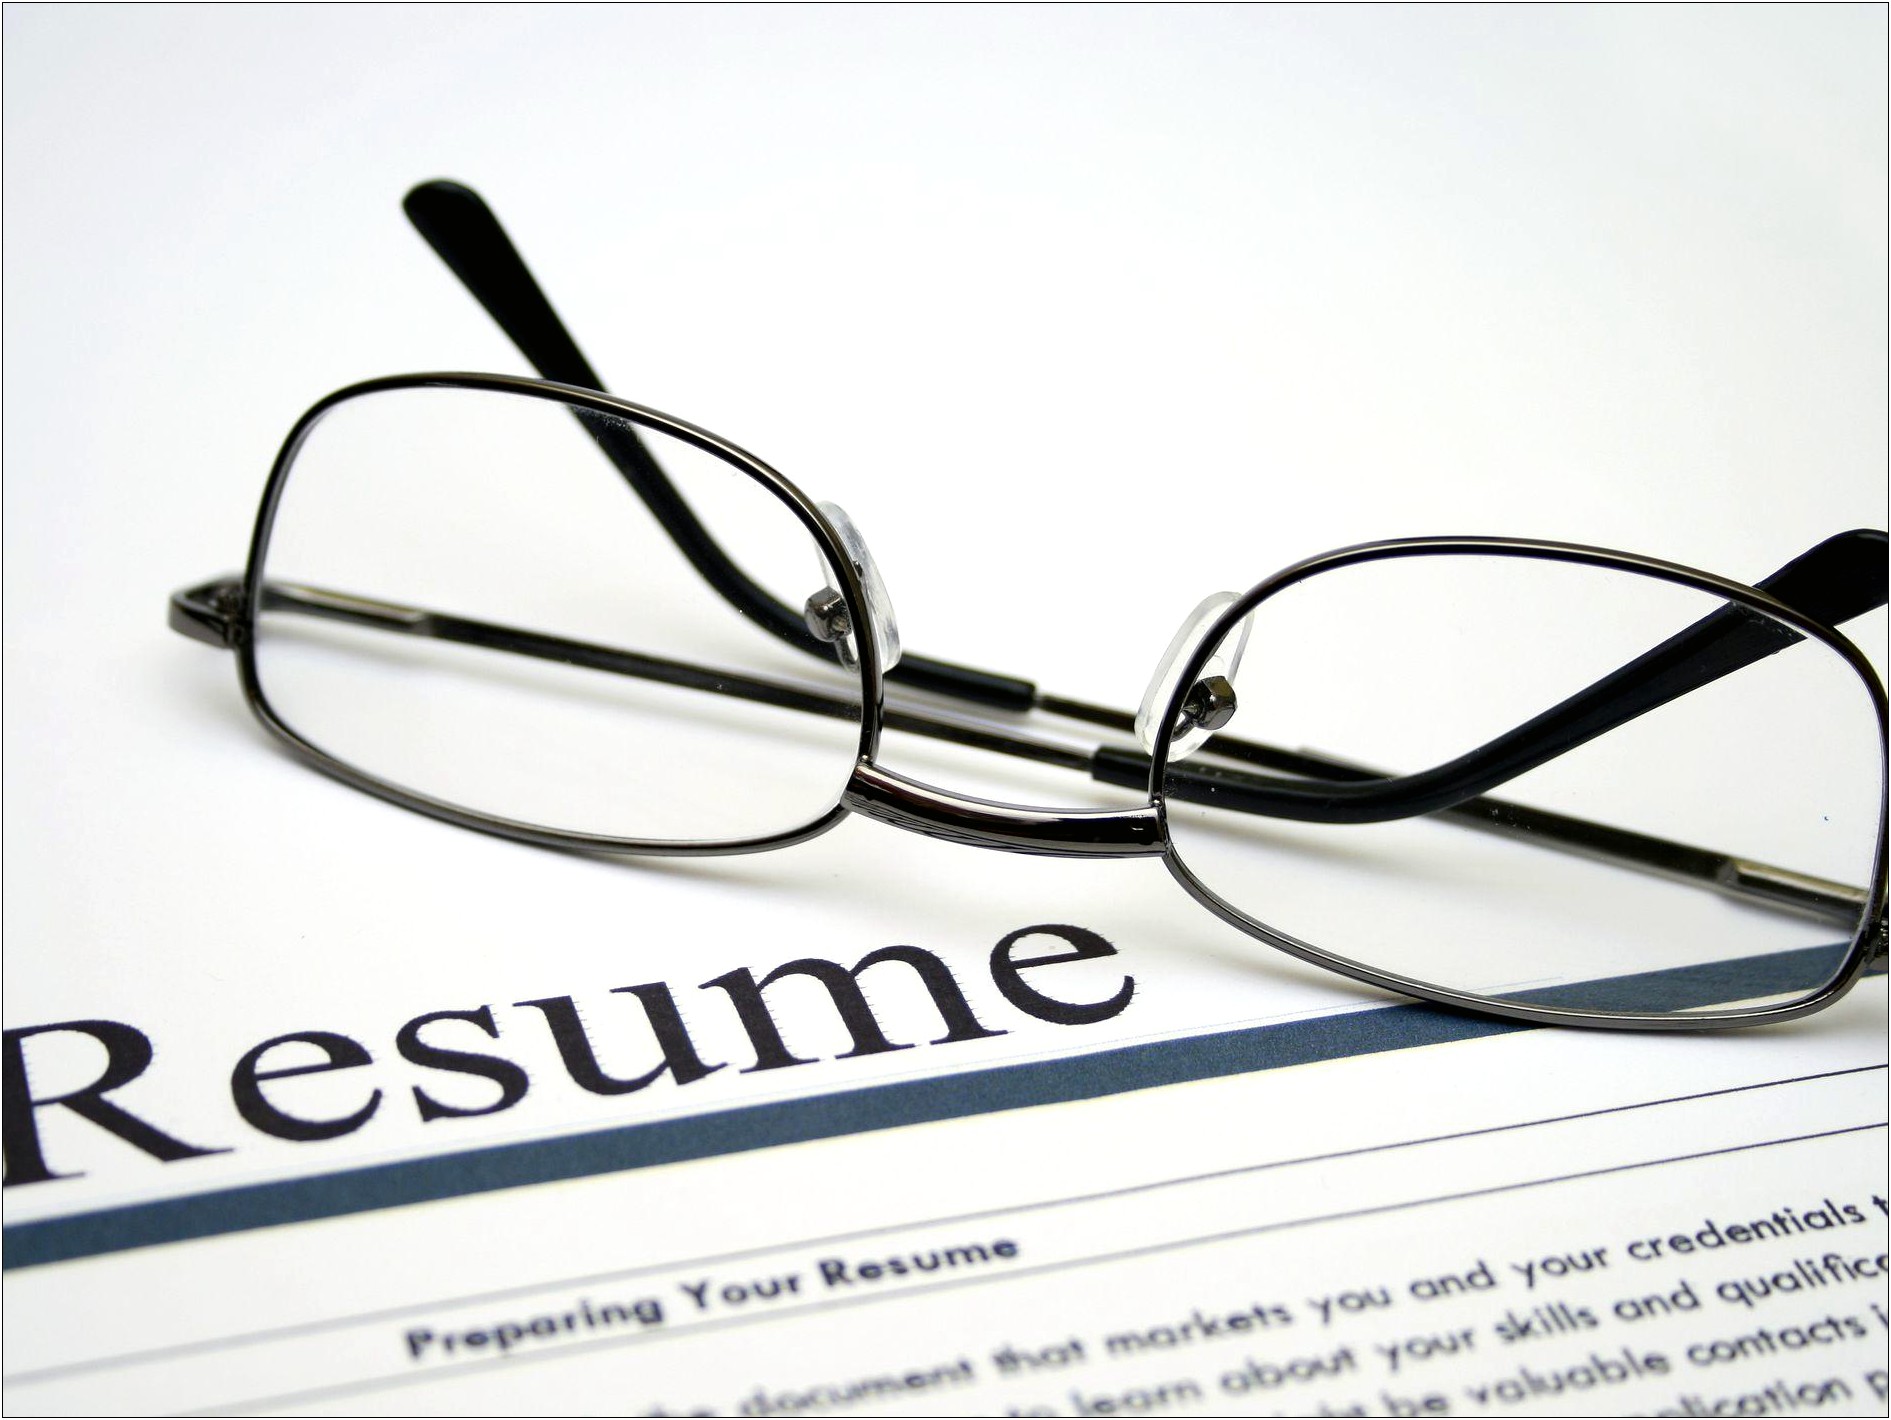 Michigan Law Office Of Career Planning Resume Template